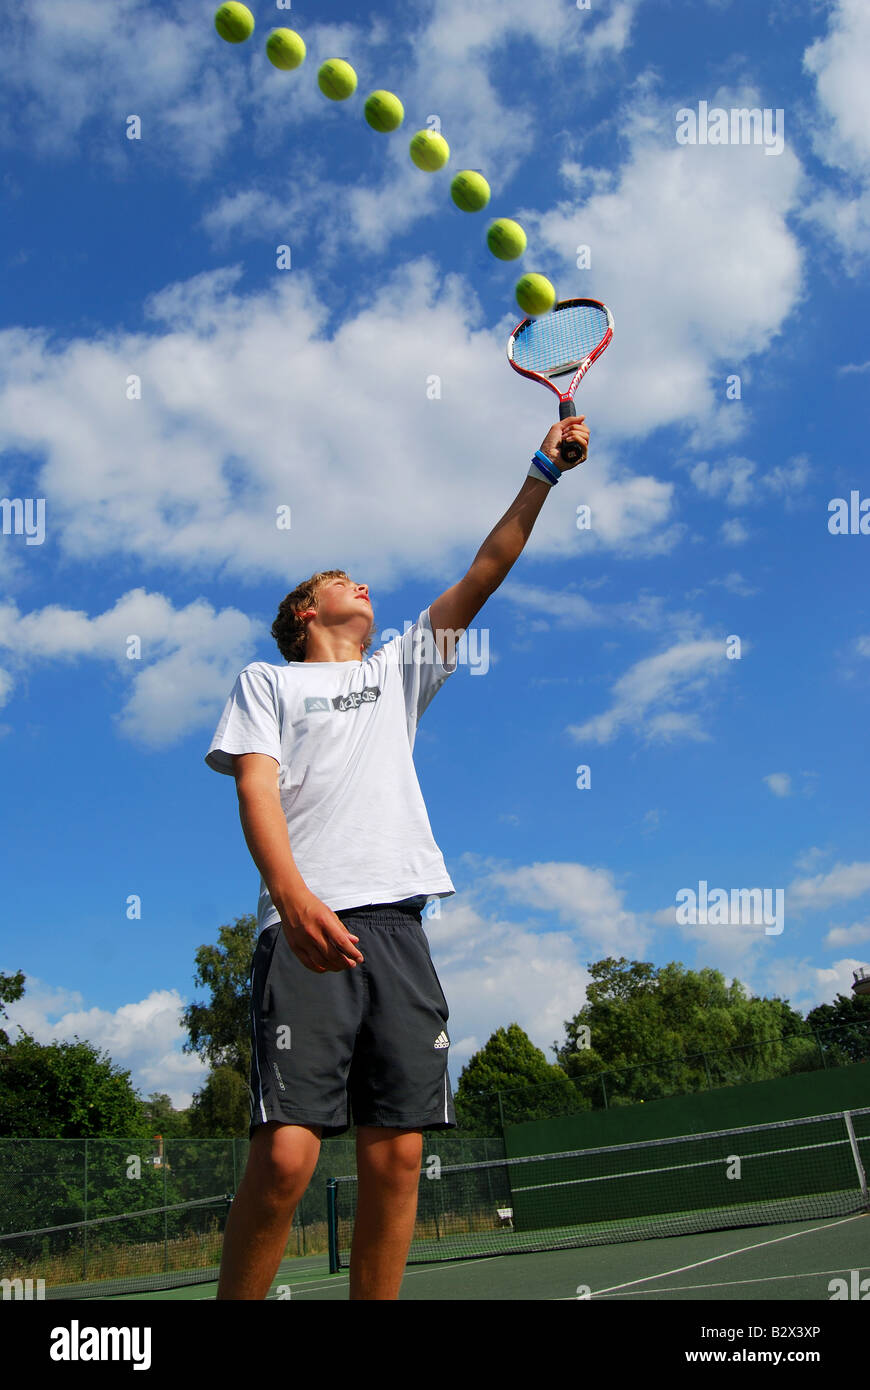 Player hitting Tennis-volley, Twickenham, Richmond upon Thames, Grand Londres, Angleterre, Royaume-Uni Banque D'Images